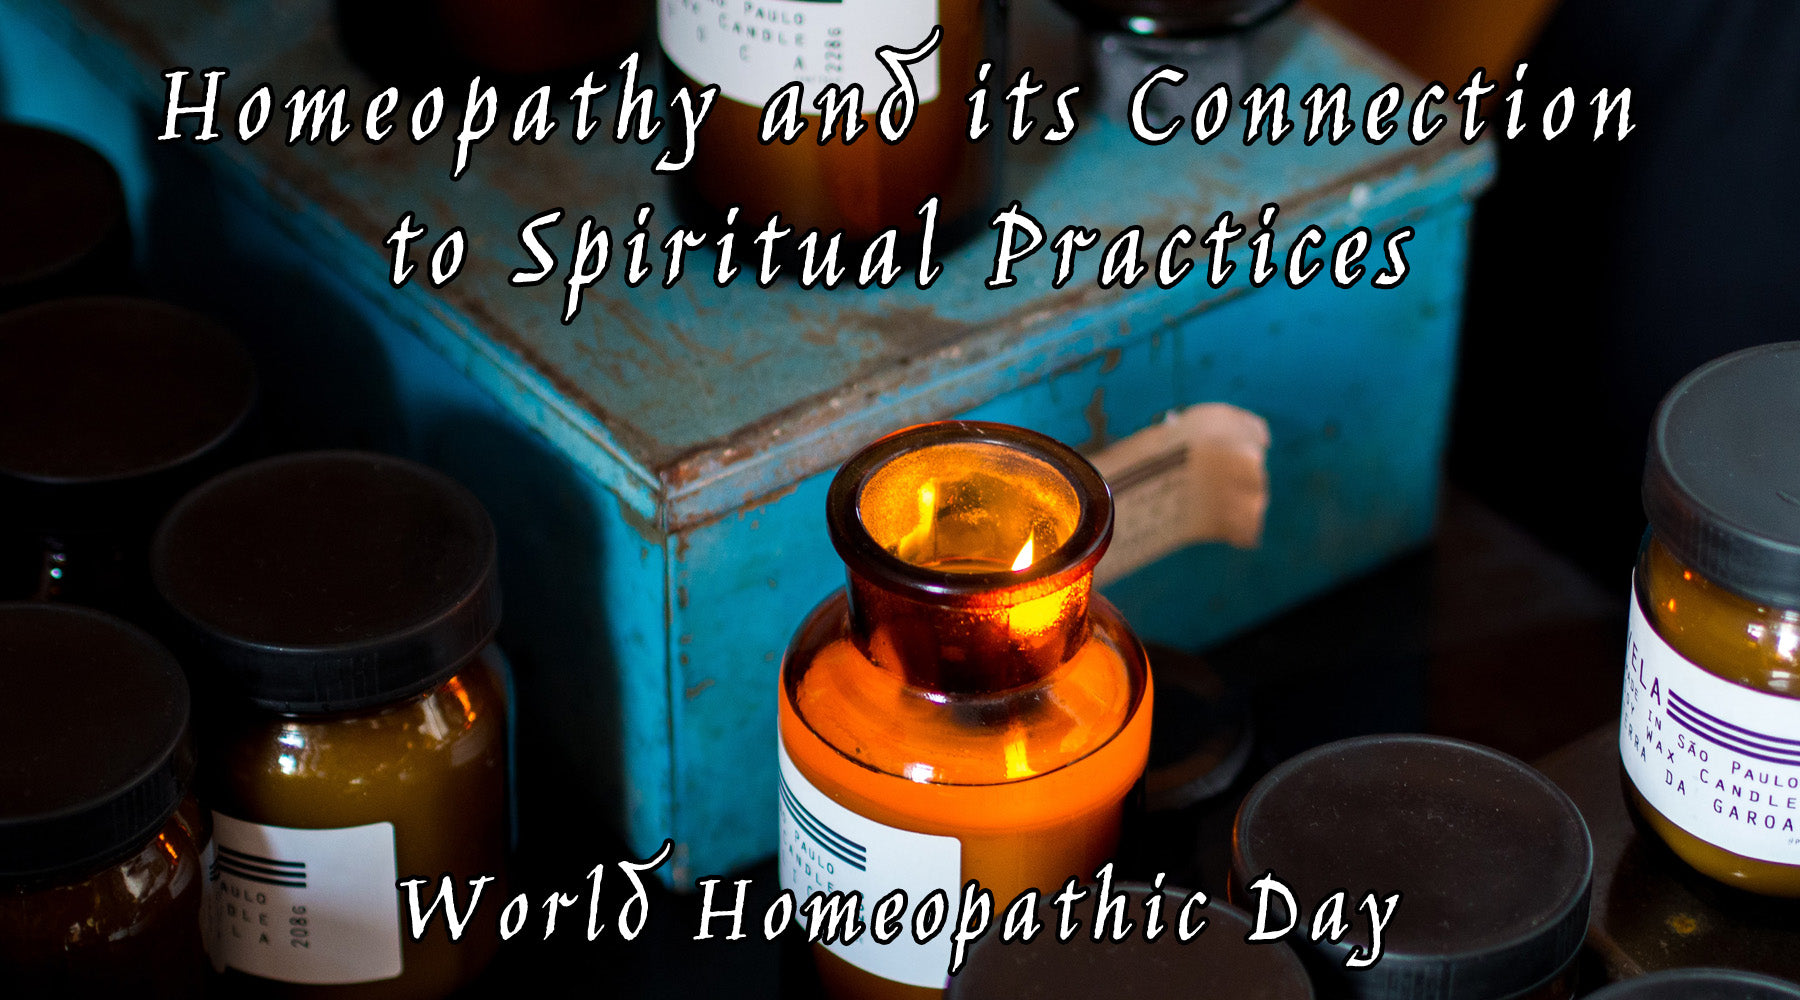 World Homeopathy Day: Homeopathy and its Connection to Spiritual Practices